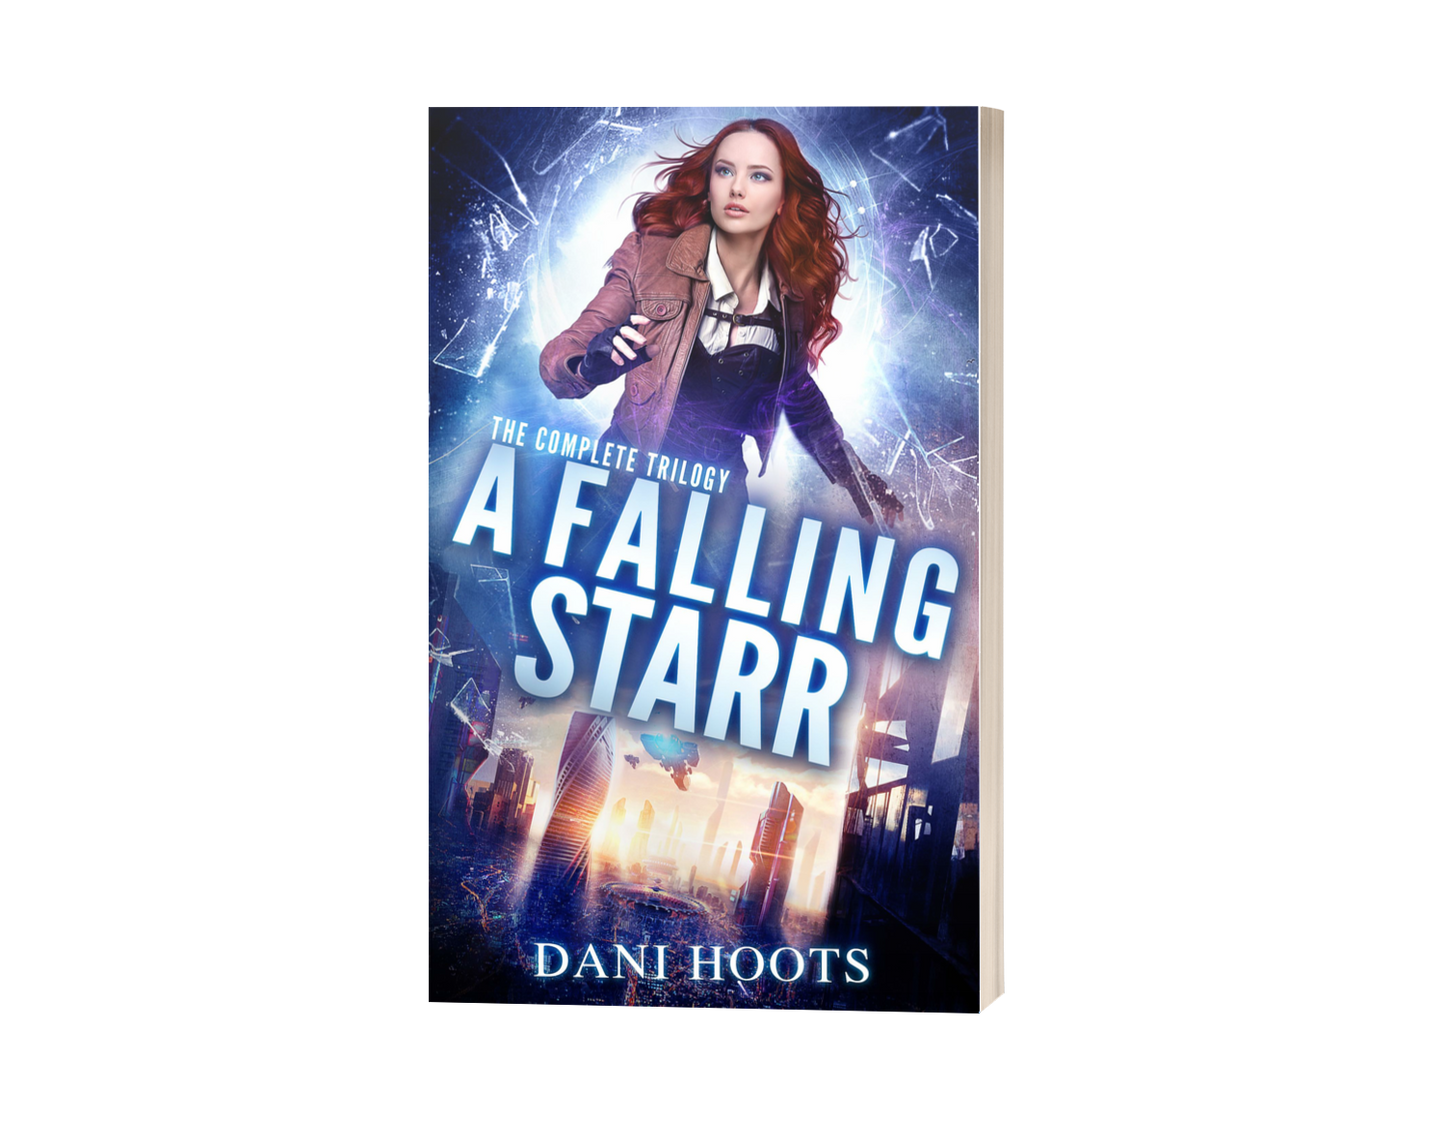 A Falling Starr (Standalone) paperback — SIGNED